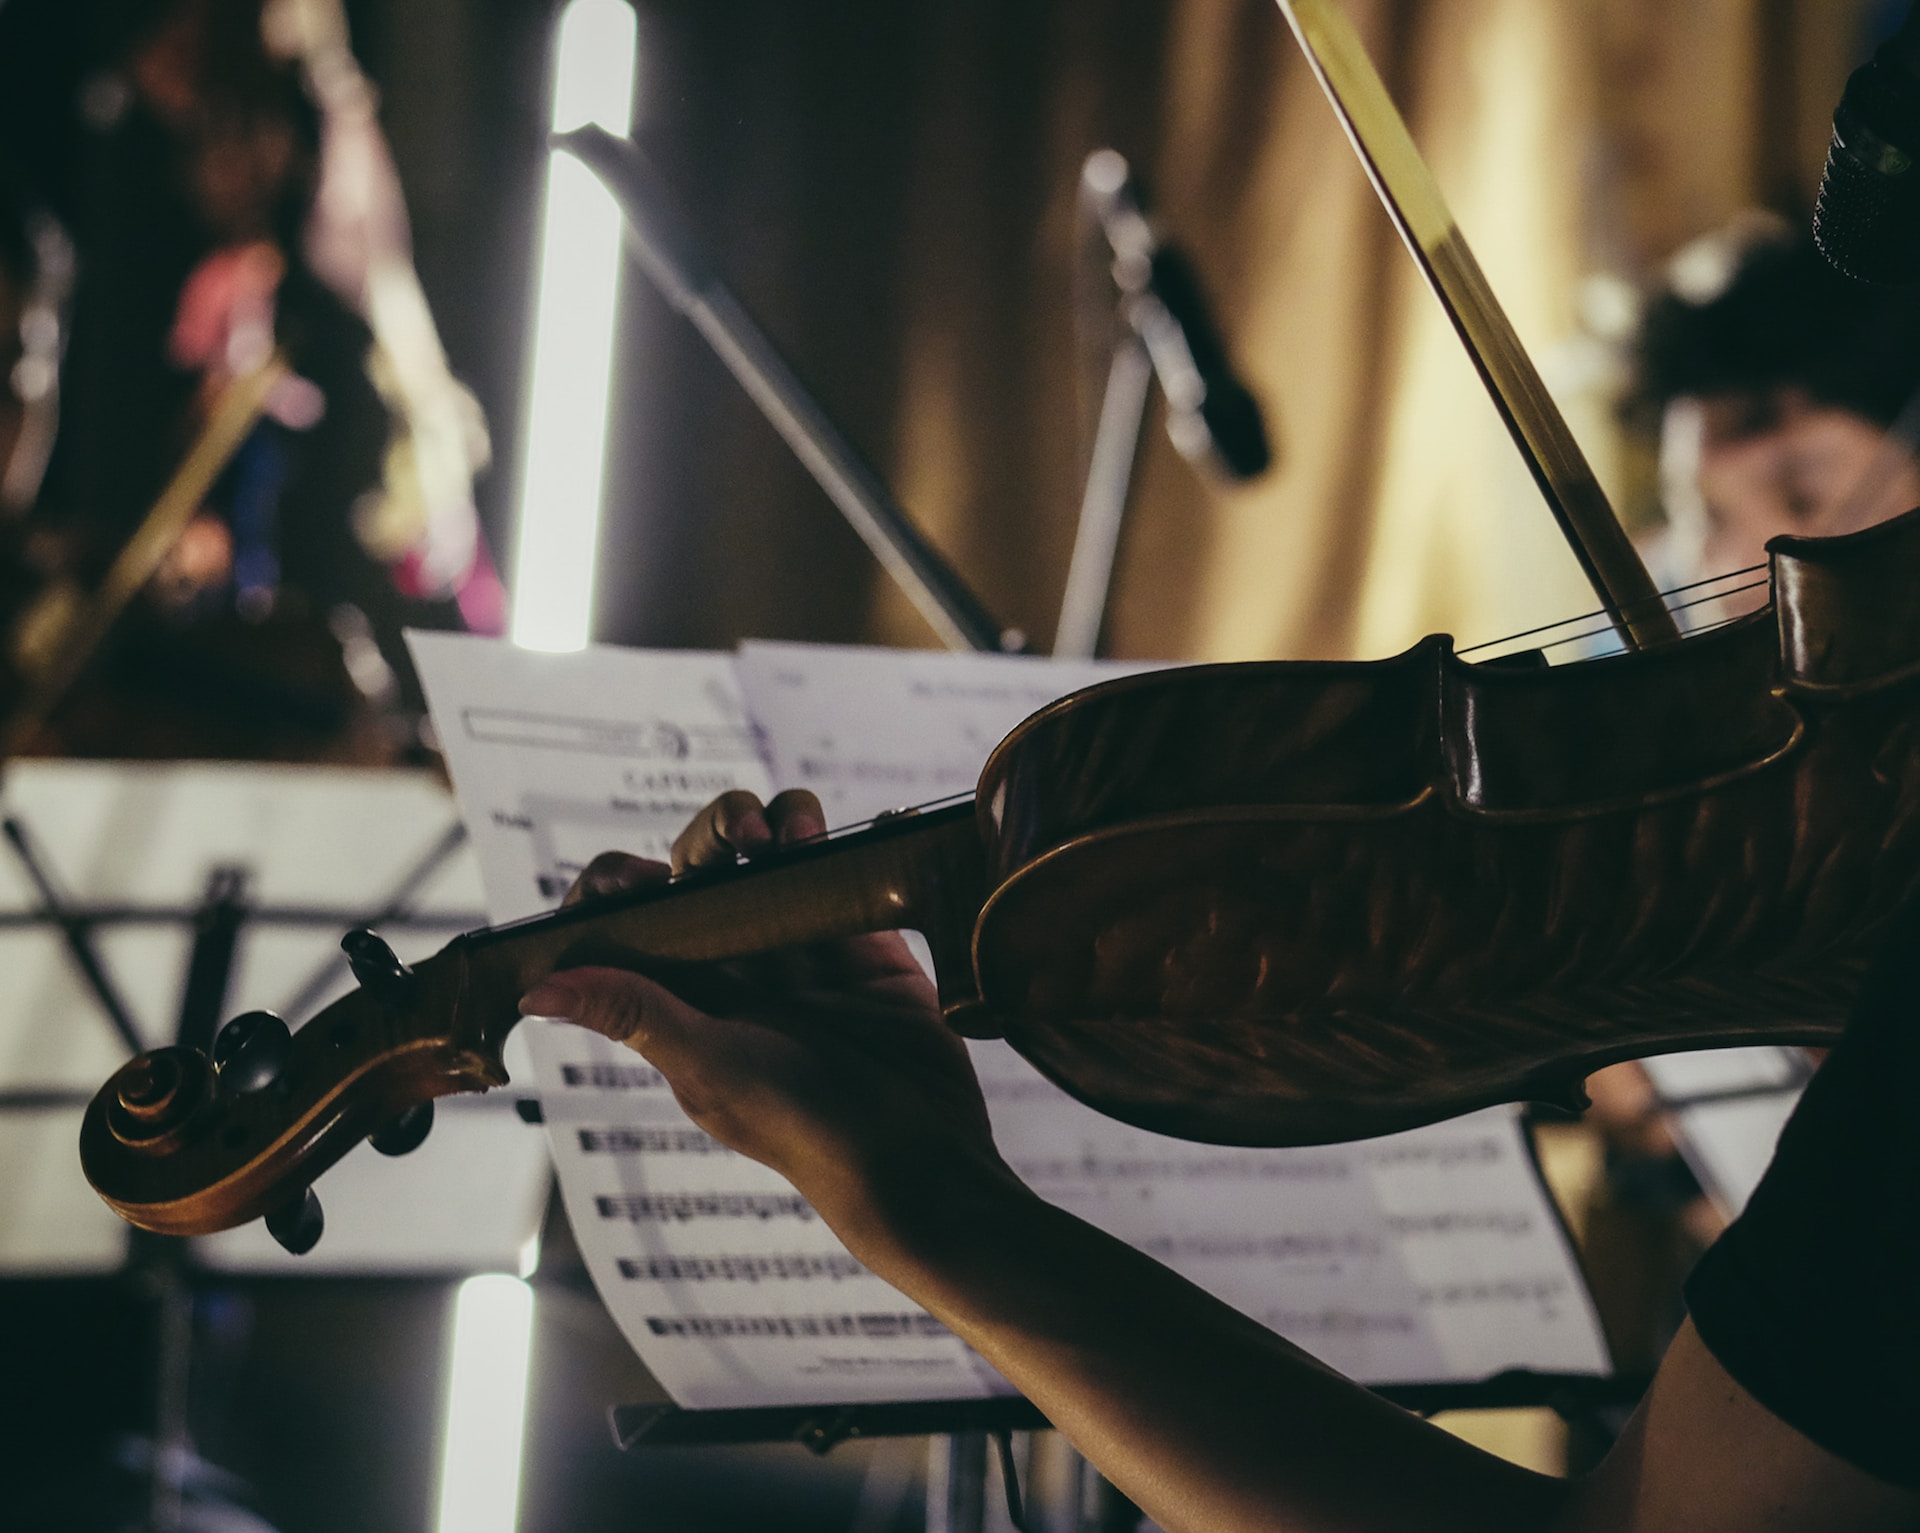 Image of a strings quartet in an orchestra. Source: unsplash